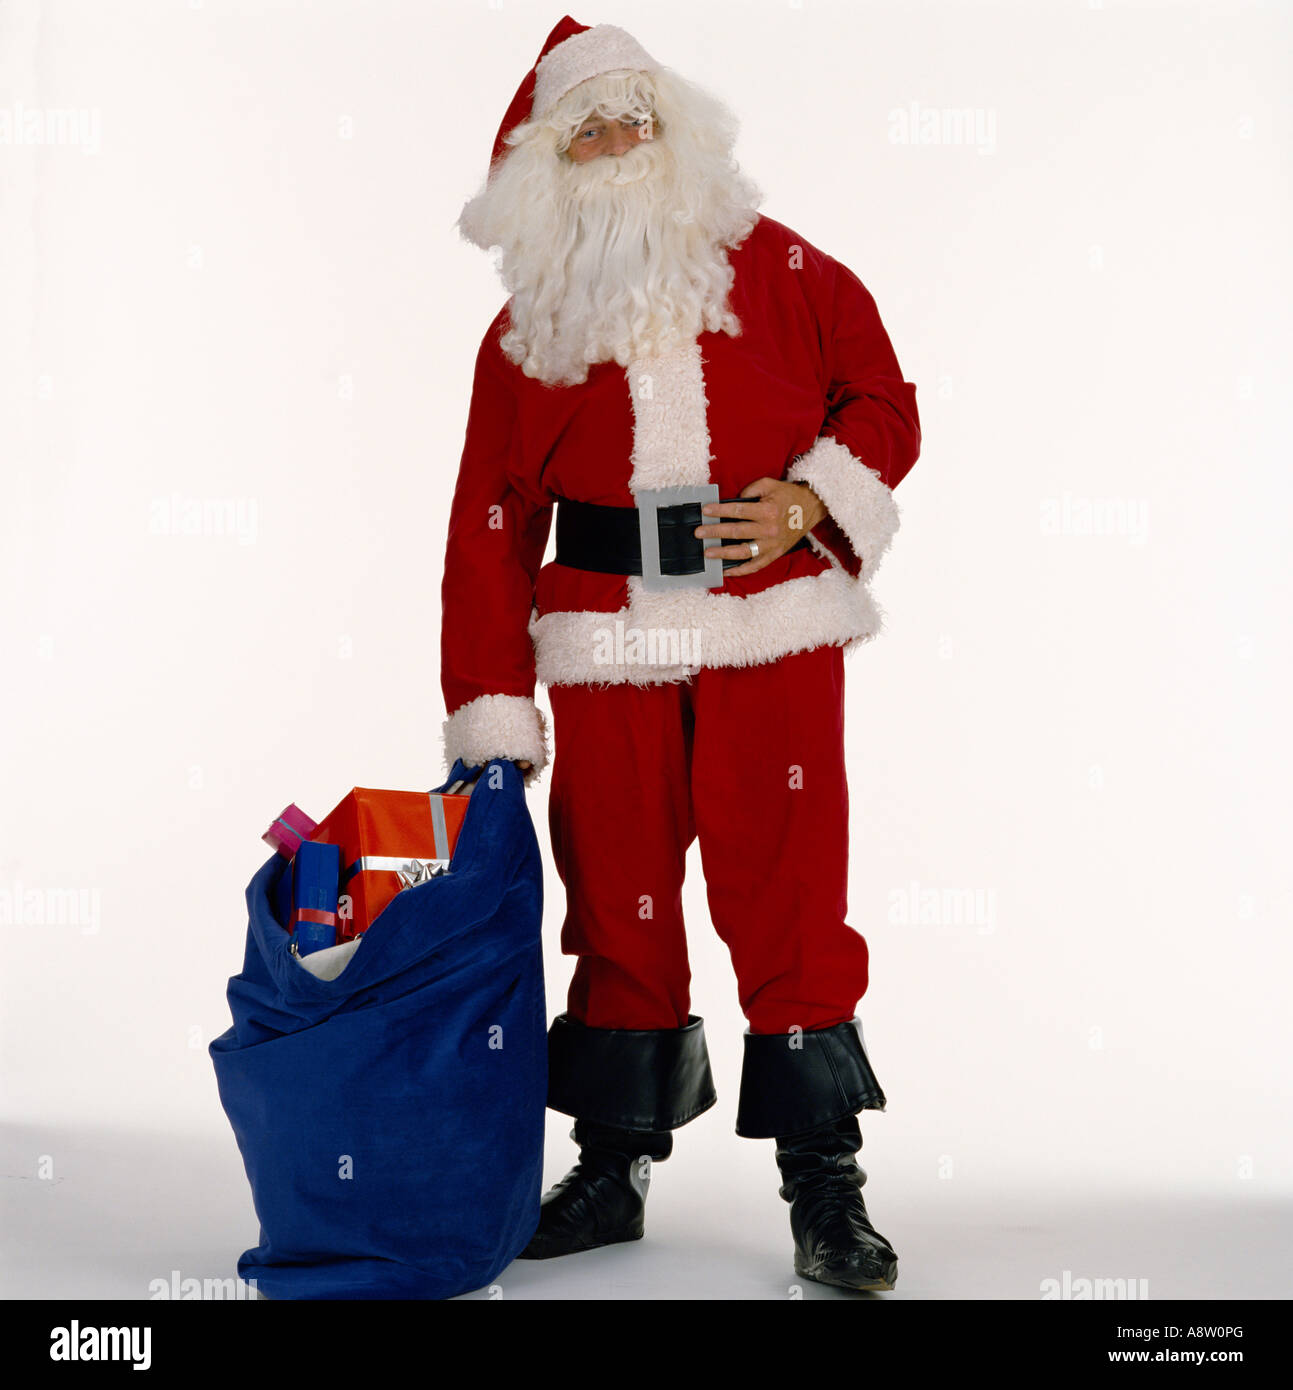 Studio image of Santa Claus / Father Christmas standing with sack of presents. Stock Photo